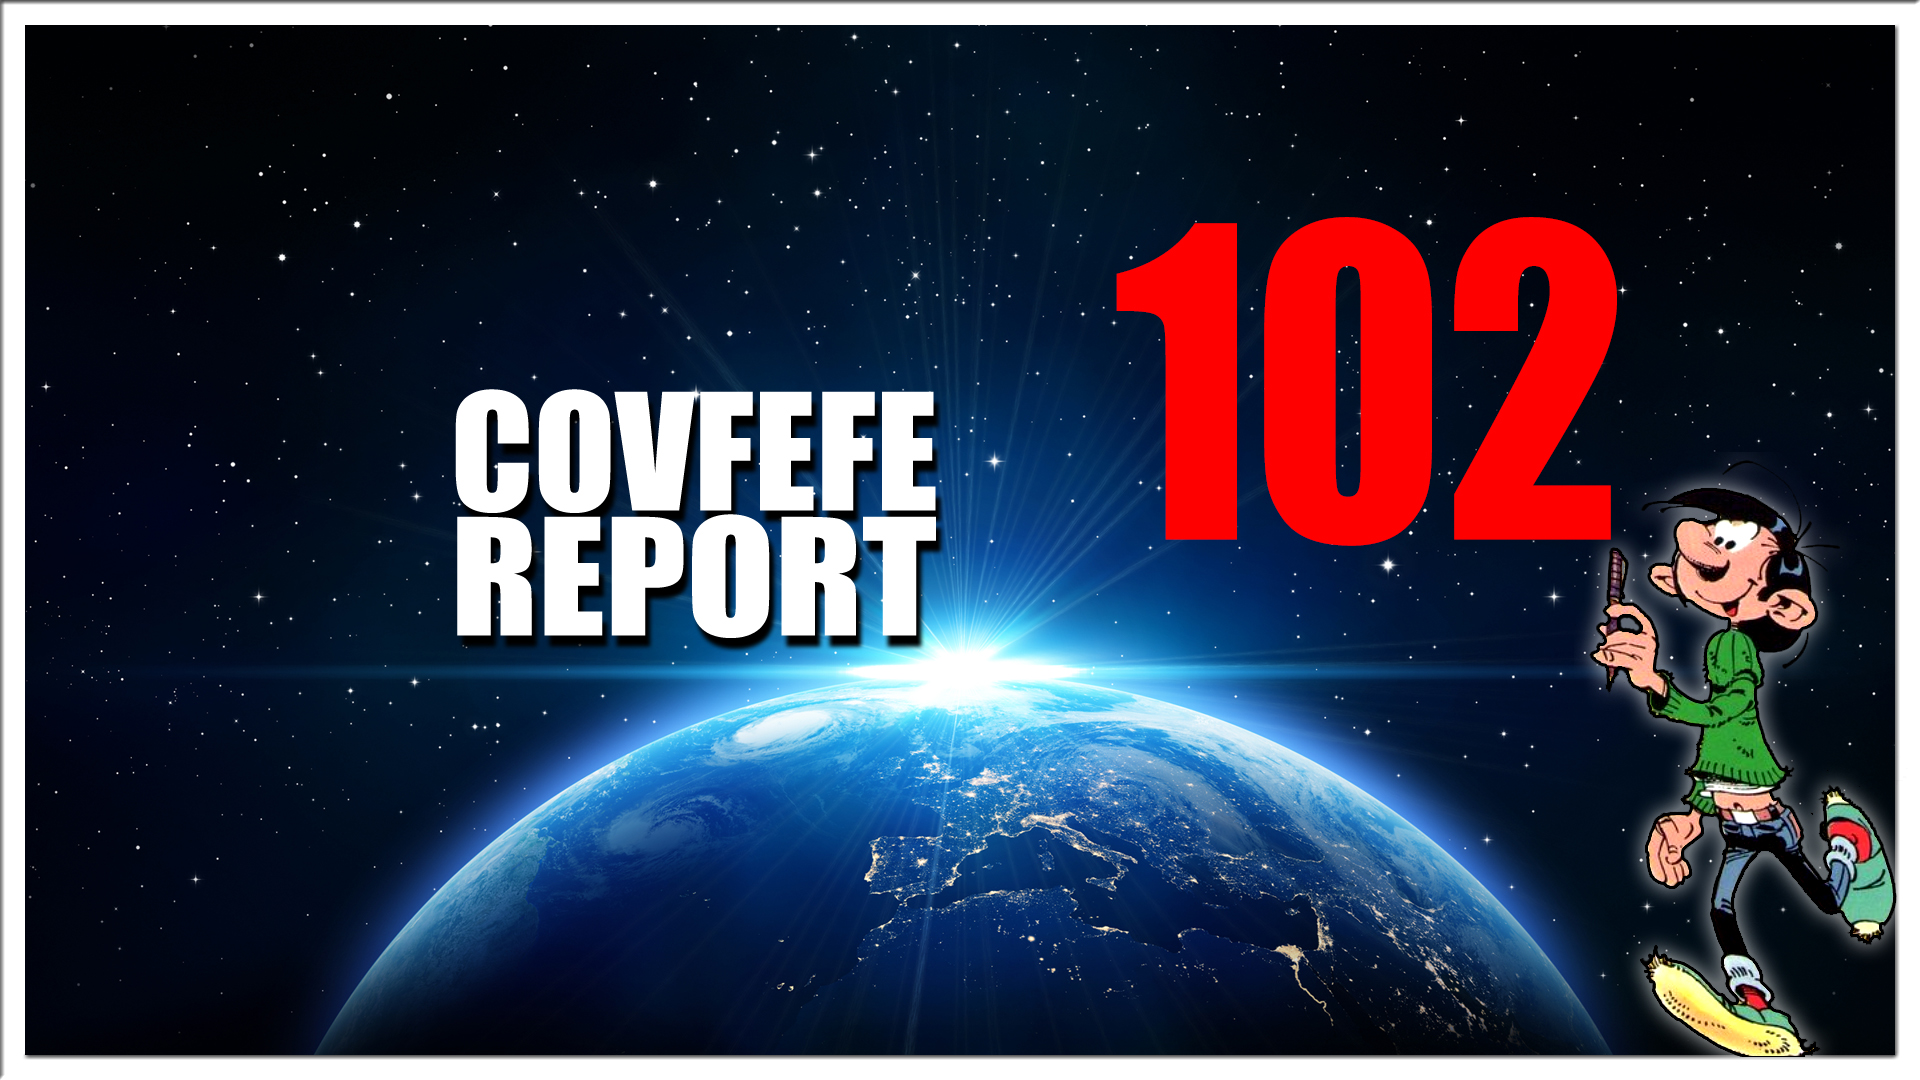 Covfefe Report 102. Who is the anonymous, CETA, Roger Stone